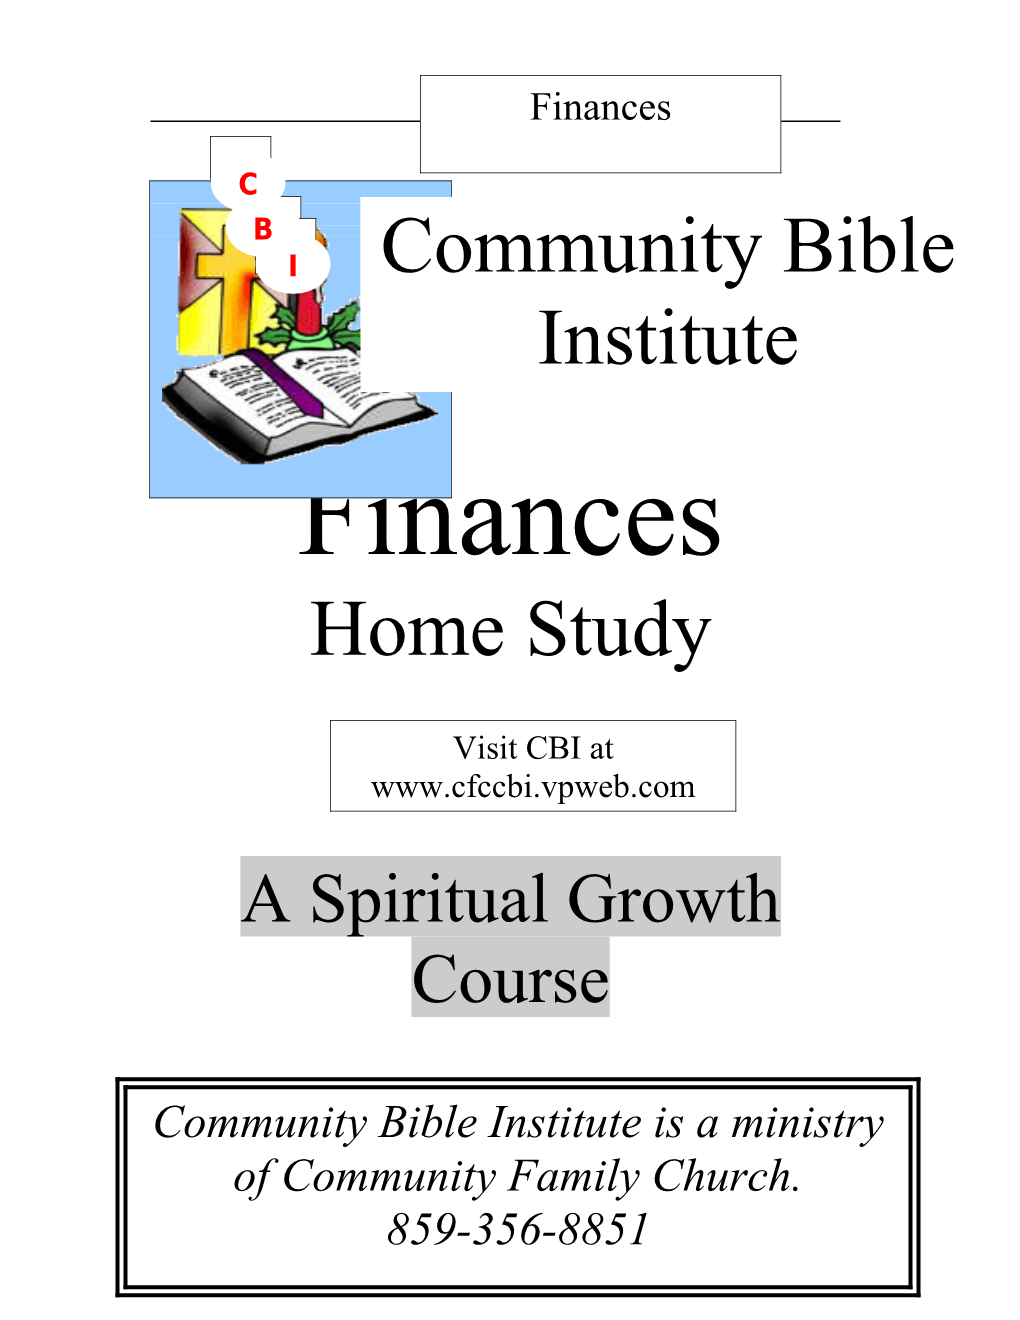 Visit Community Bible Institute on the Internet